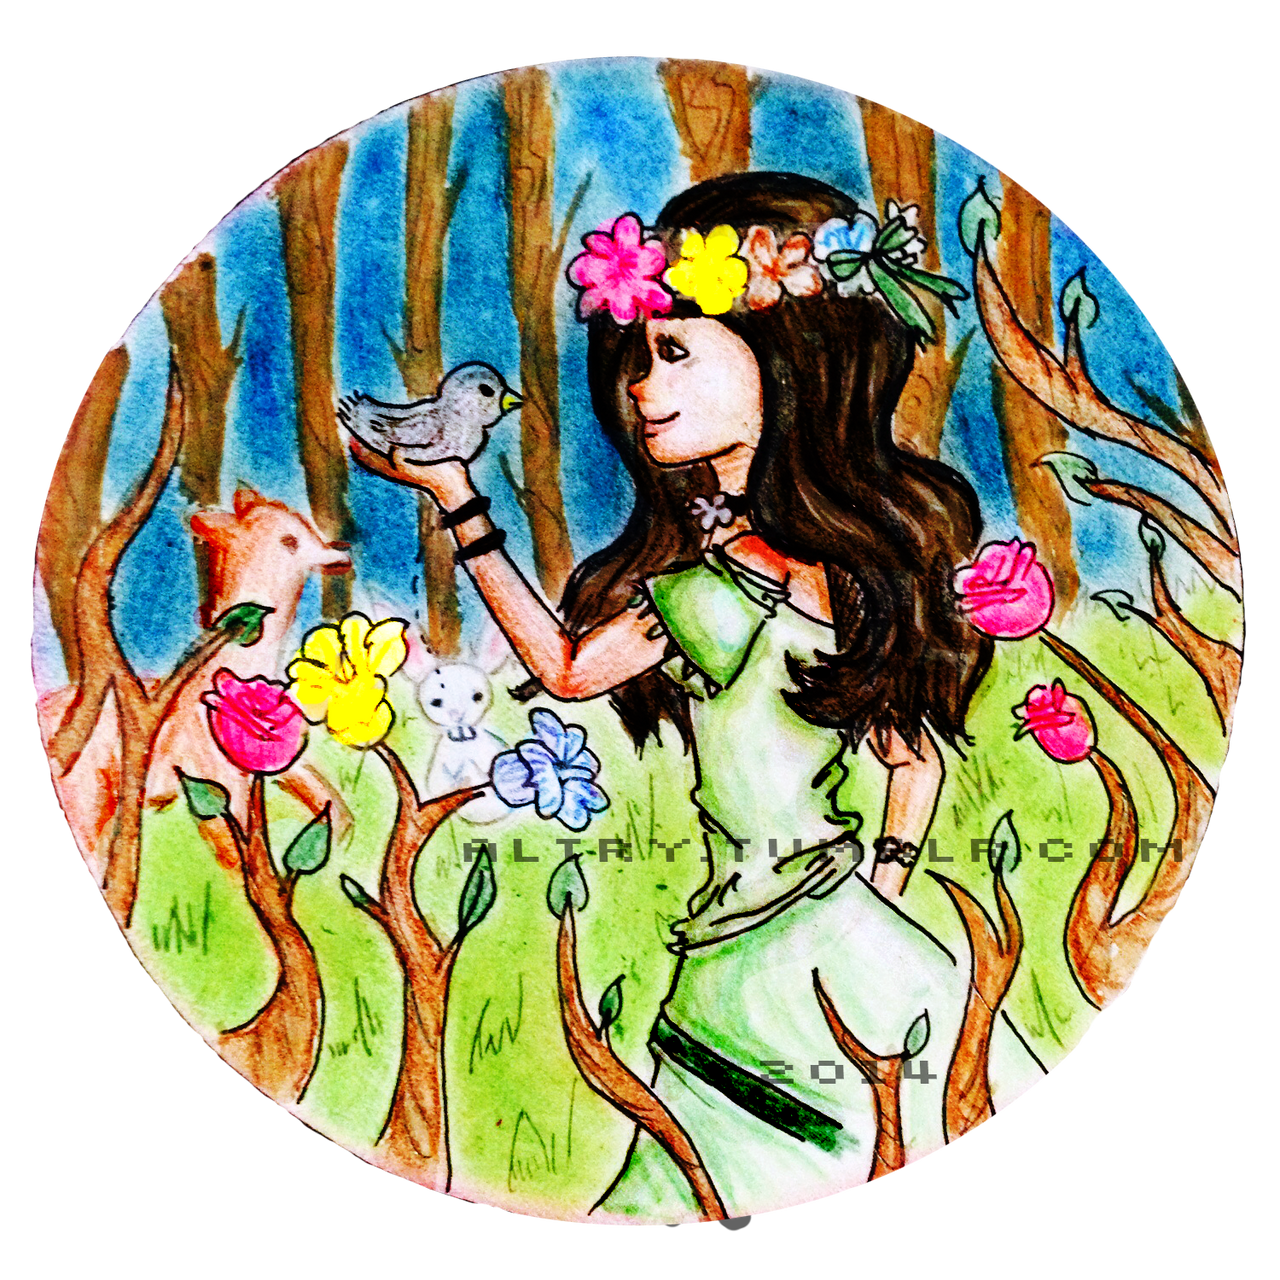 Maria Makiling, Myths and legends contest